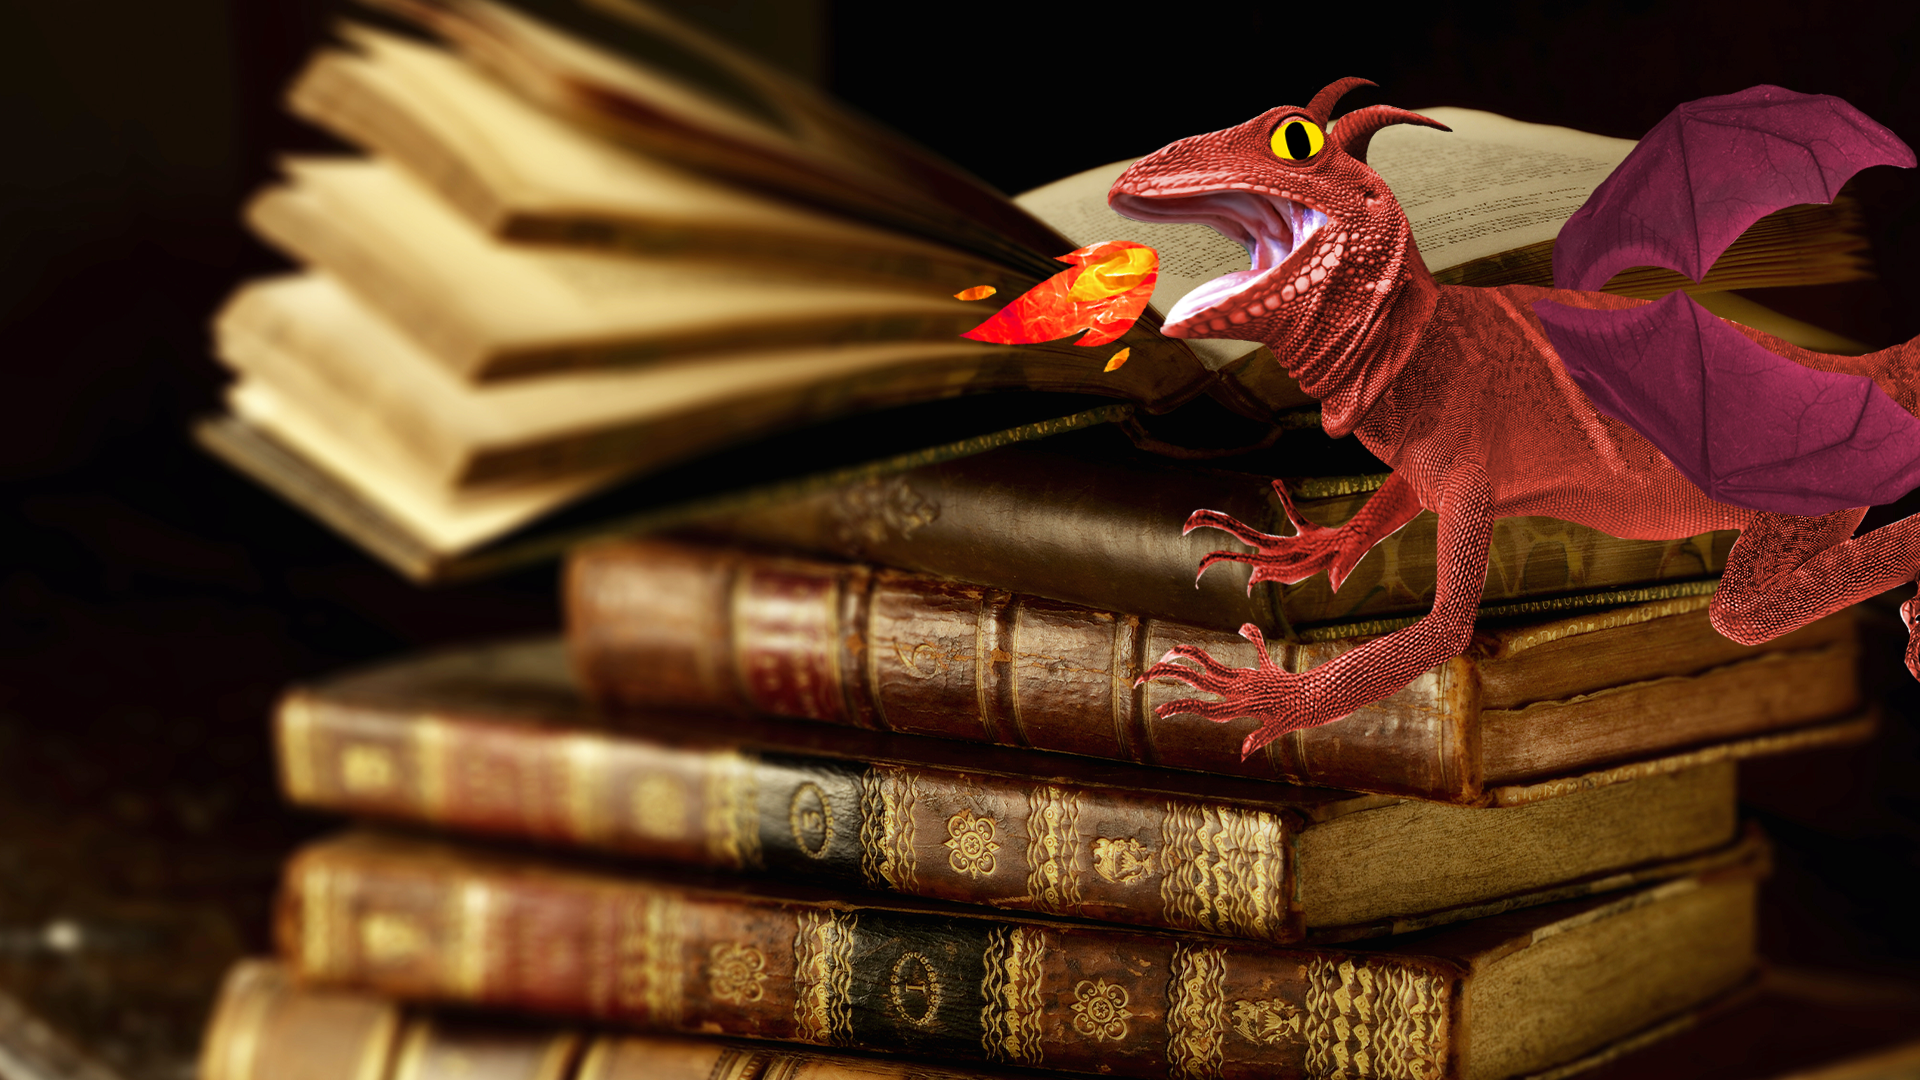 A pile of old books and a dragon